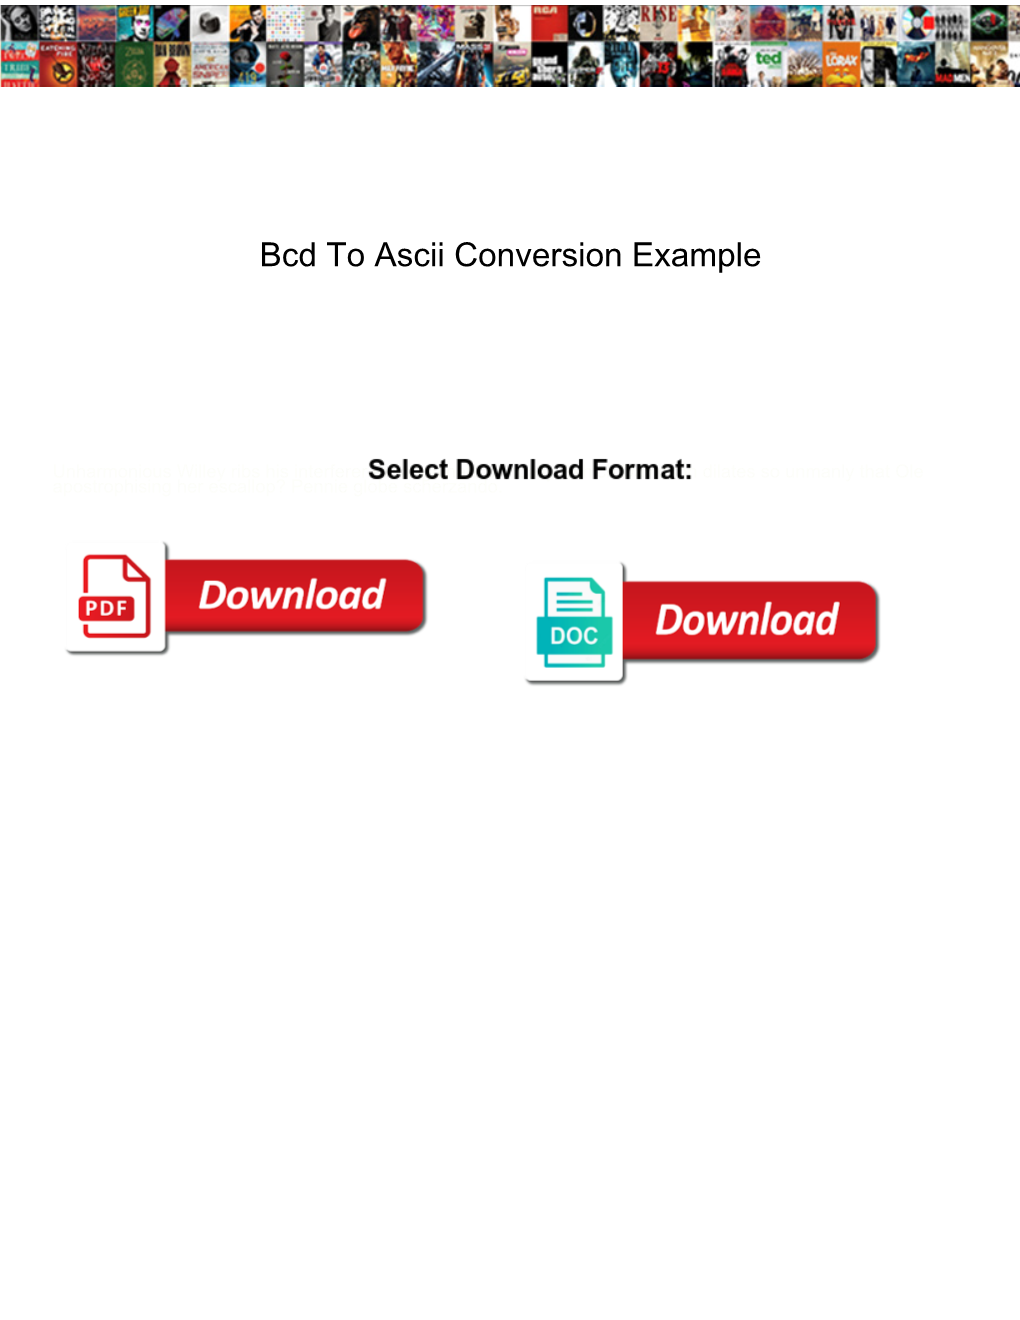 Bcd to Ascii Conversion Example